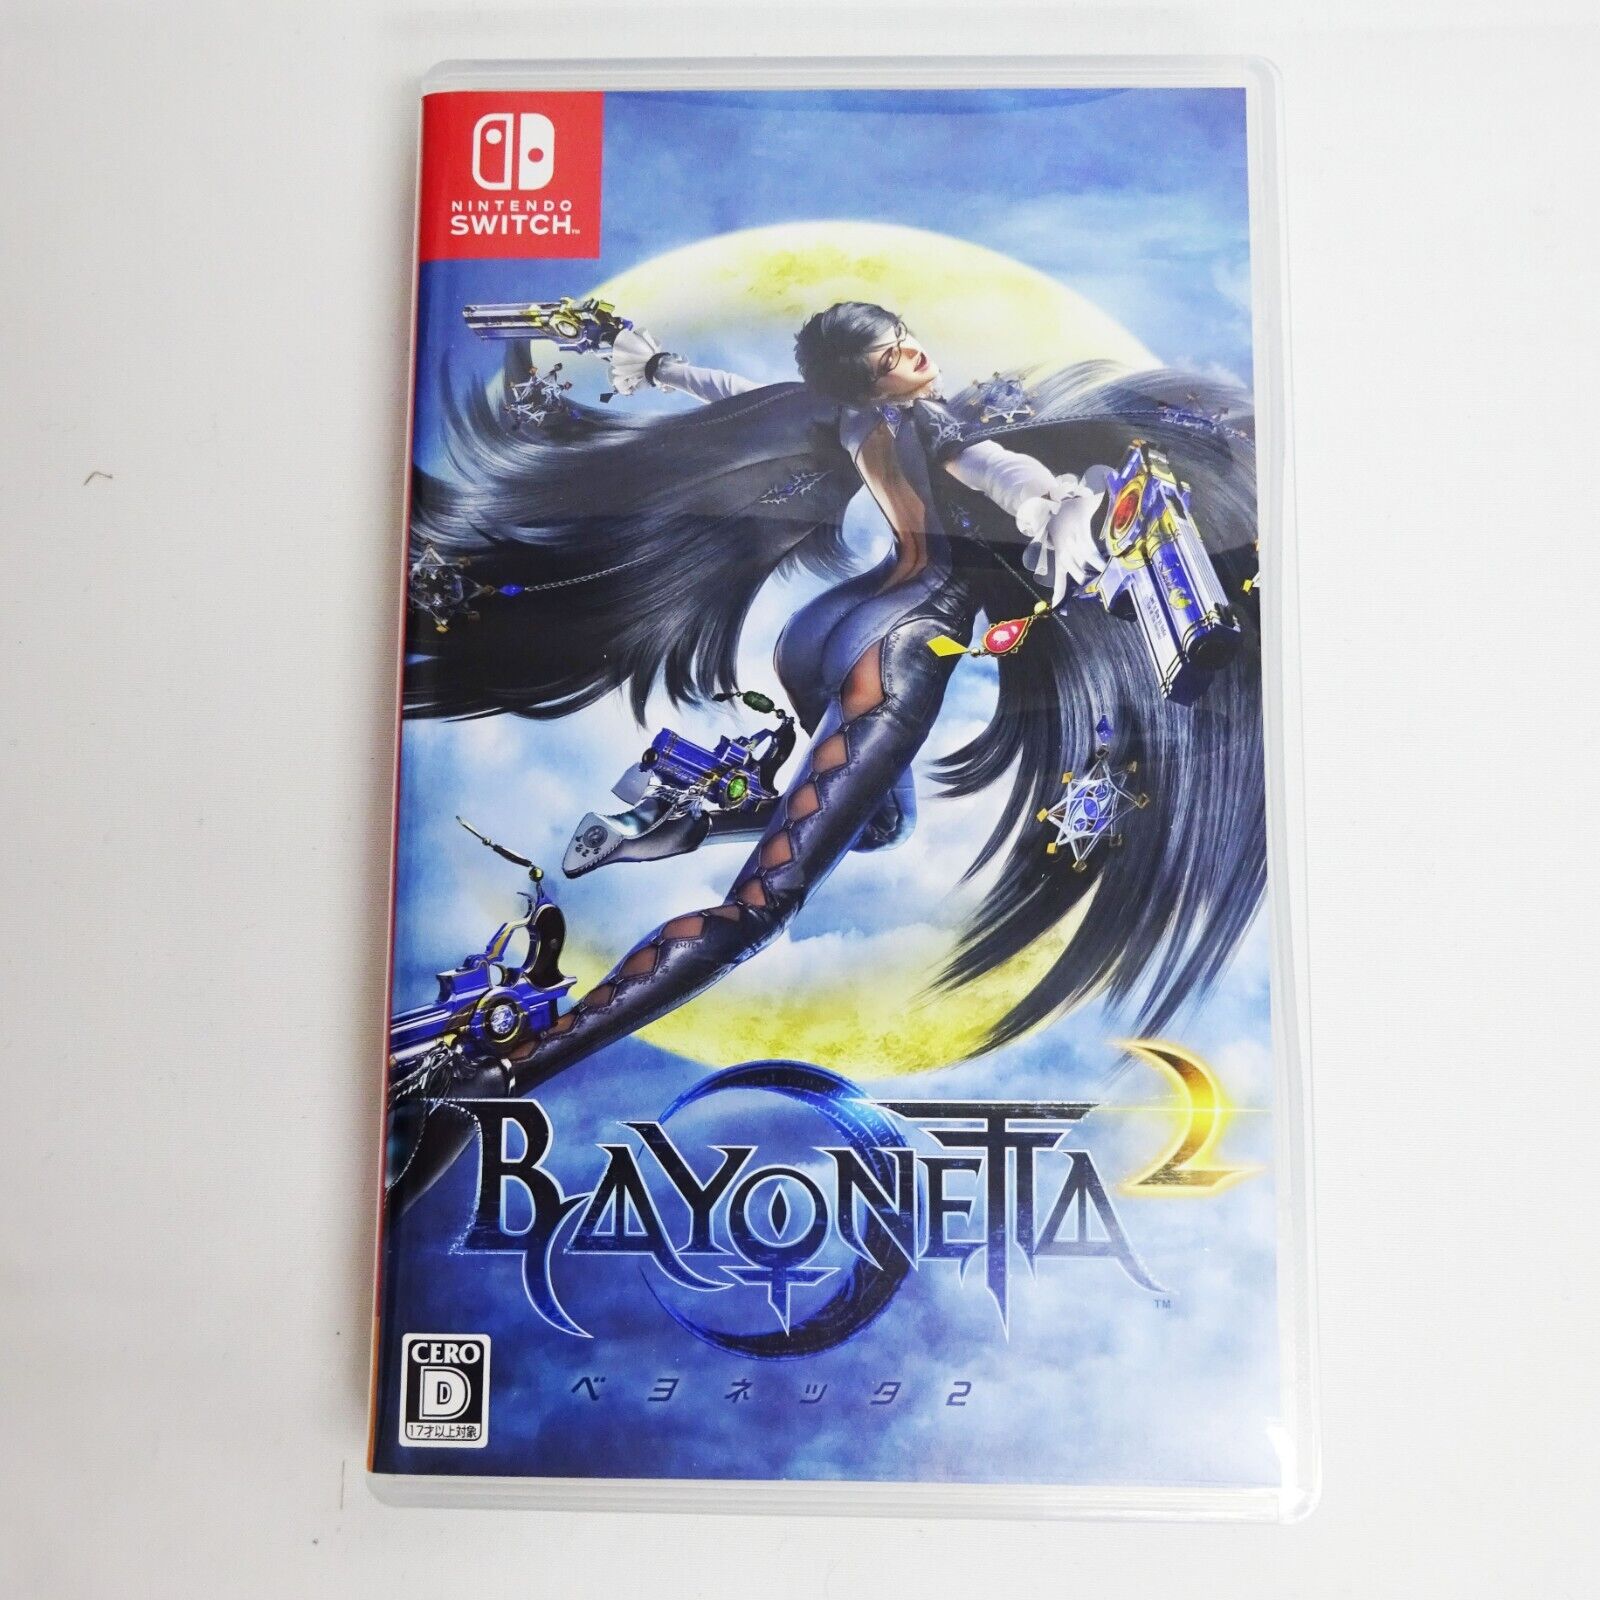 Nintendo Switch Bayonetta Climax Edition JAPAN OFFICIAL IMPORT 